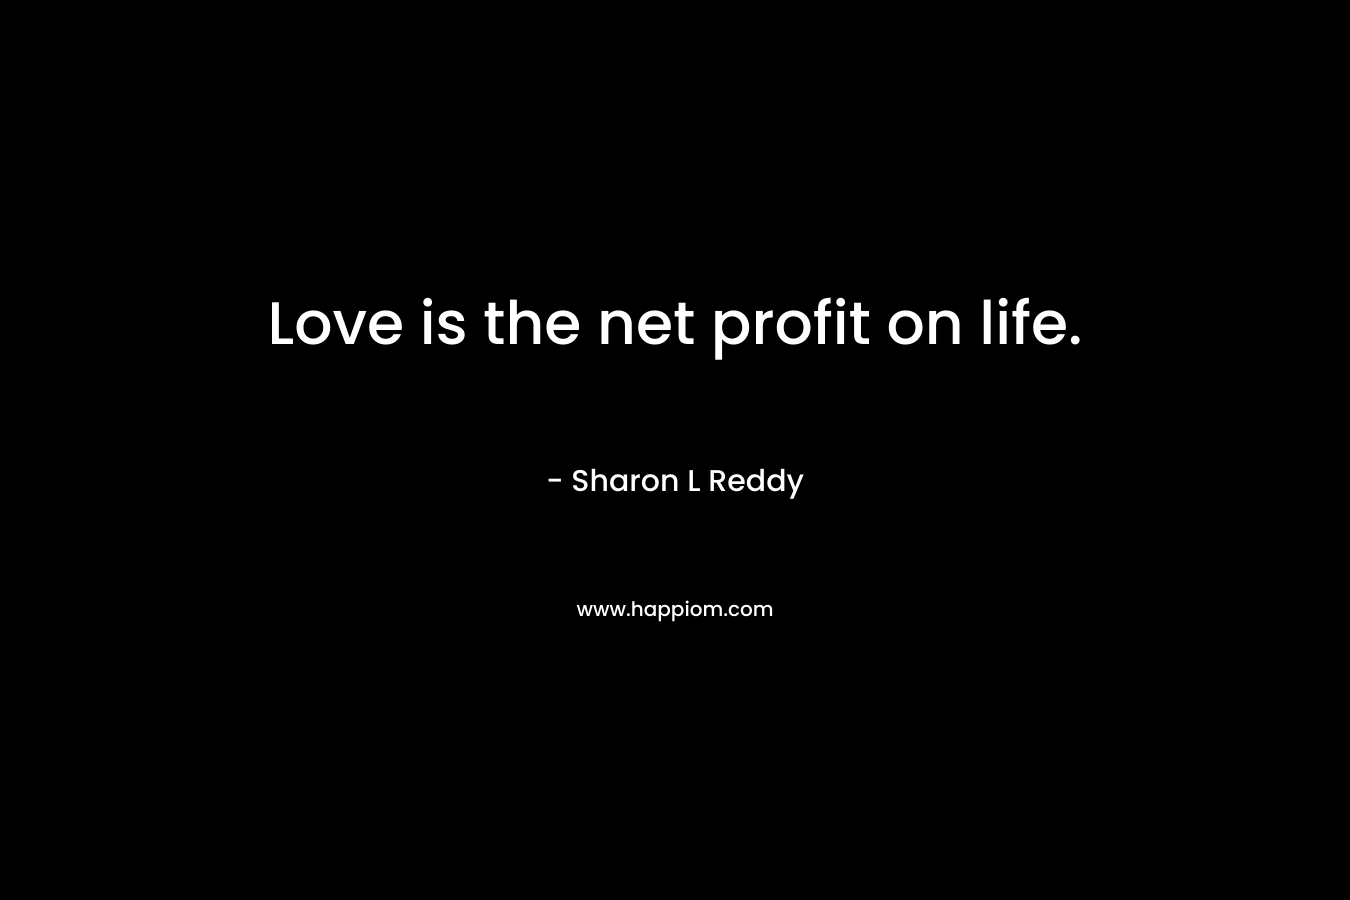 Love is the net profit on life. – Sharon L Reddy